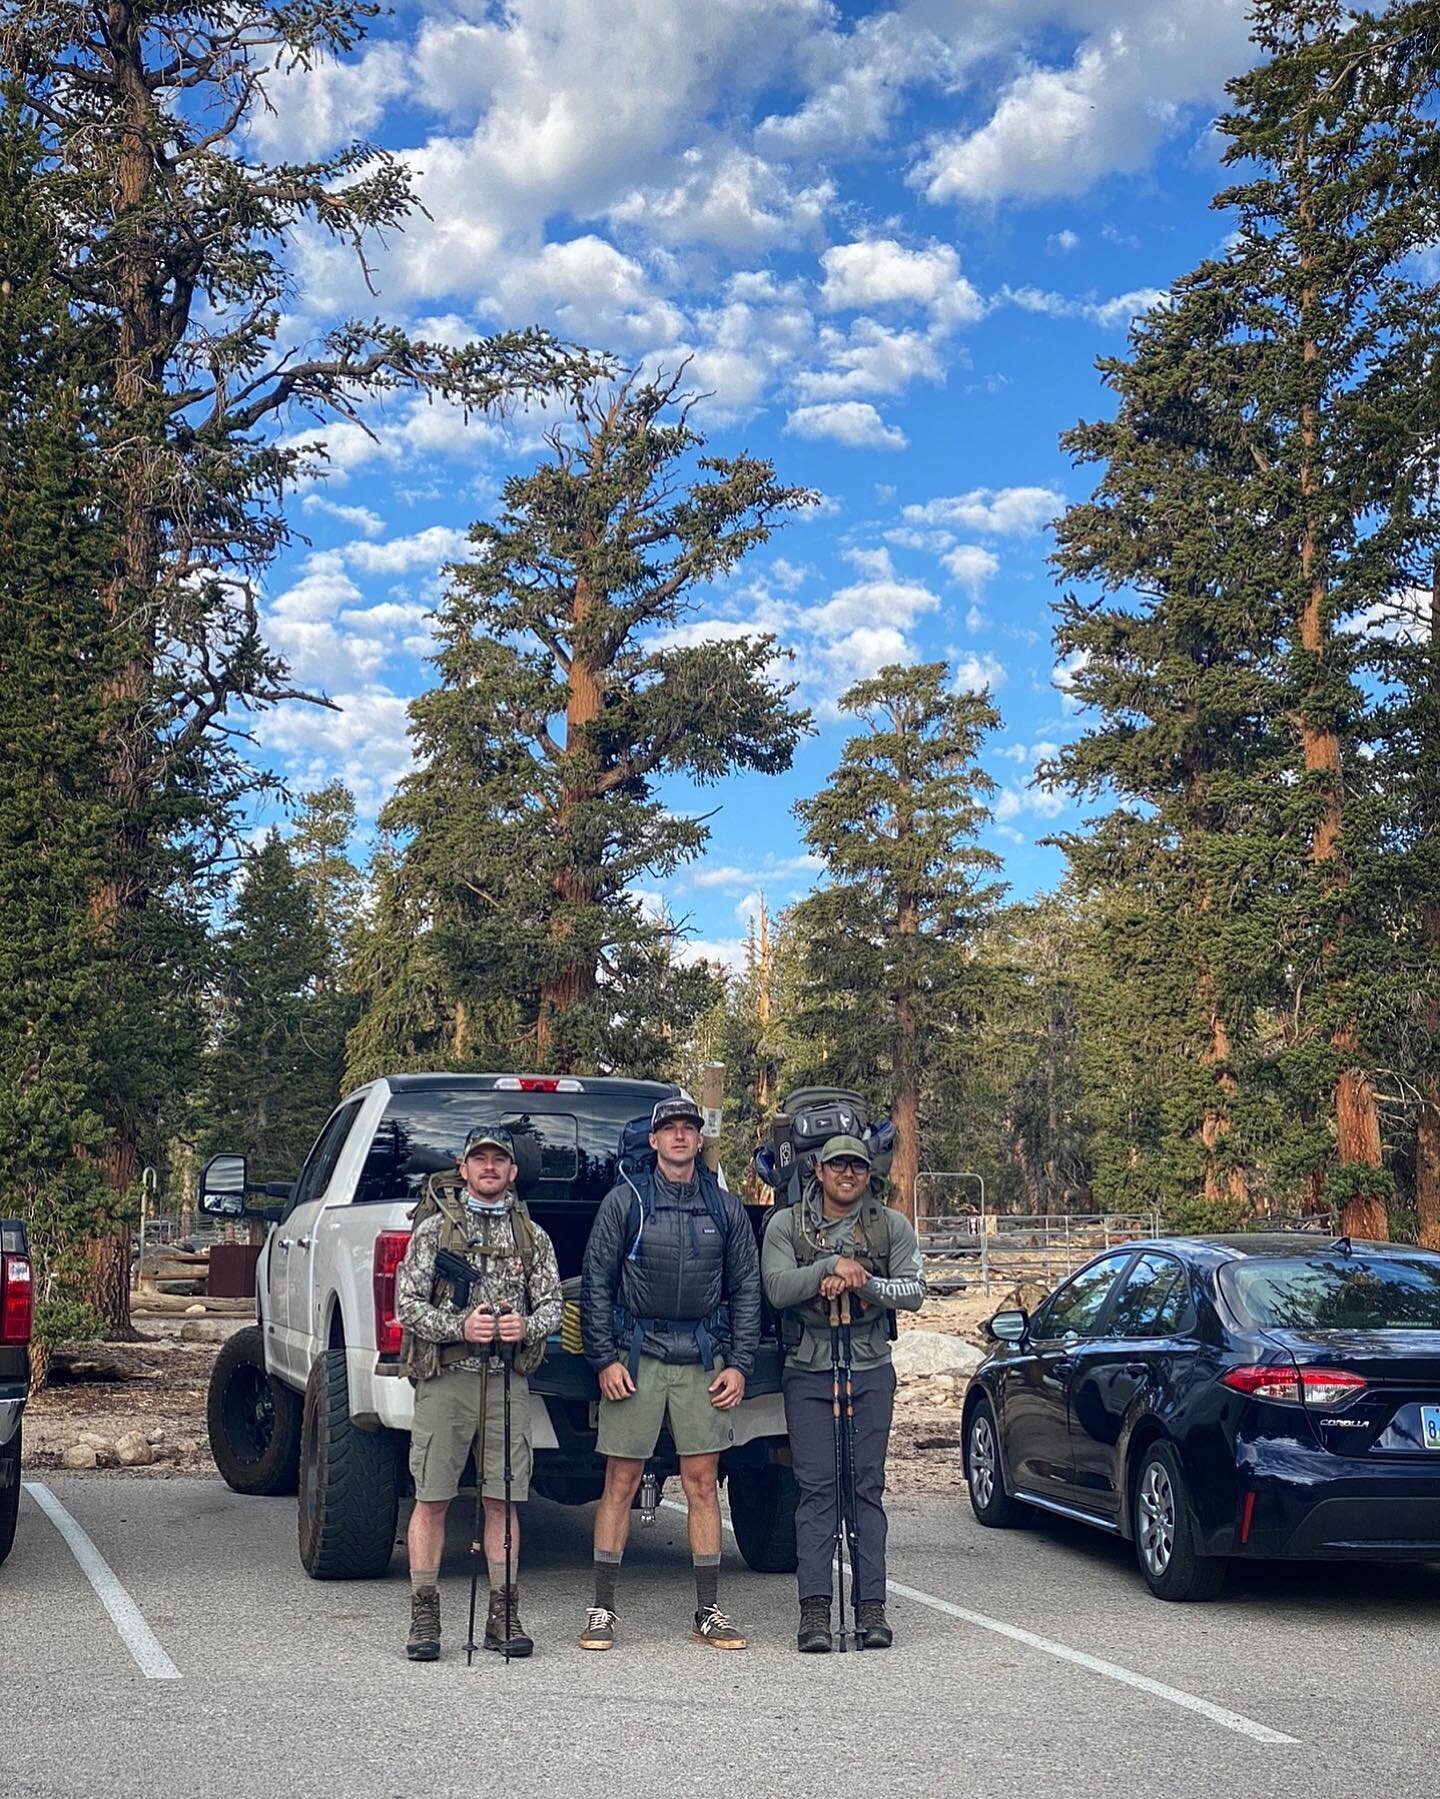 Such an amazing weekend spent  backpacking in the eastern sierras! 

@detail_therapy_llc and @firecracker_hoops taught me how to camp, fly fish, source drinking water and much more. 

Safe to say I&rsquo;ll be back in the mountains sooner rather than